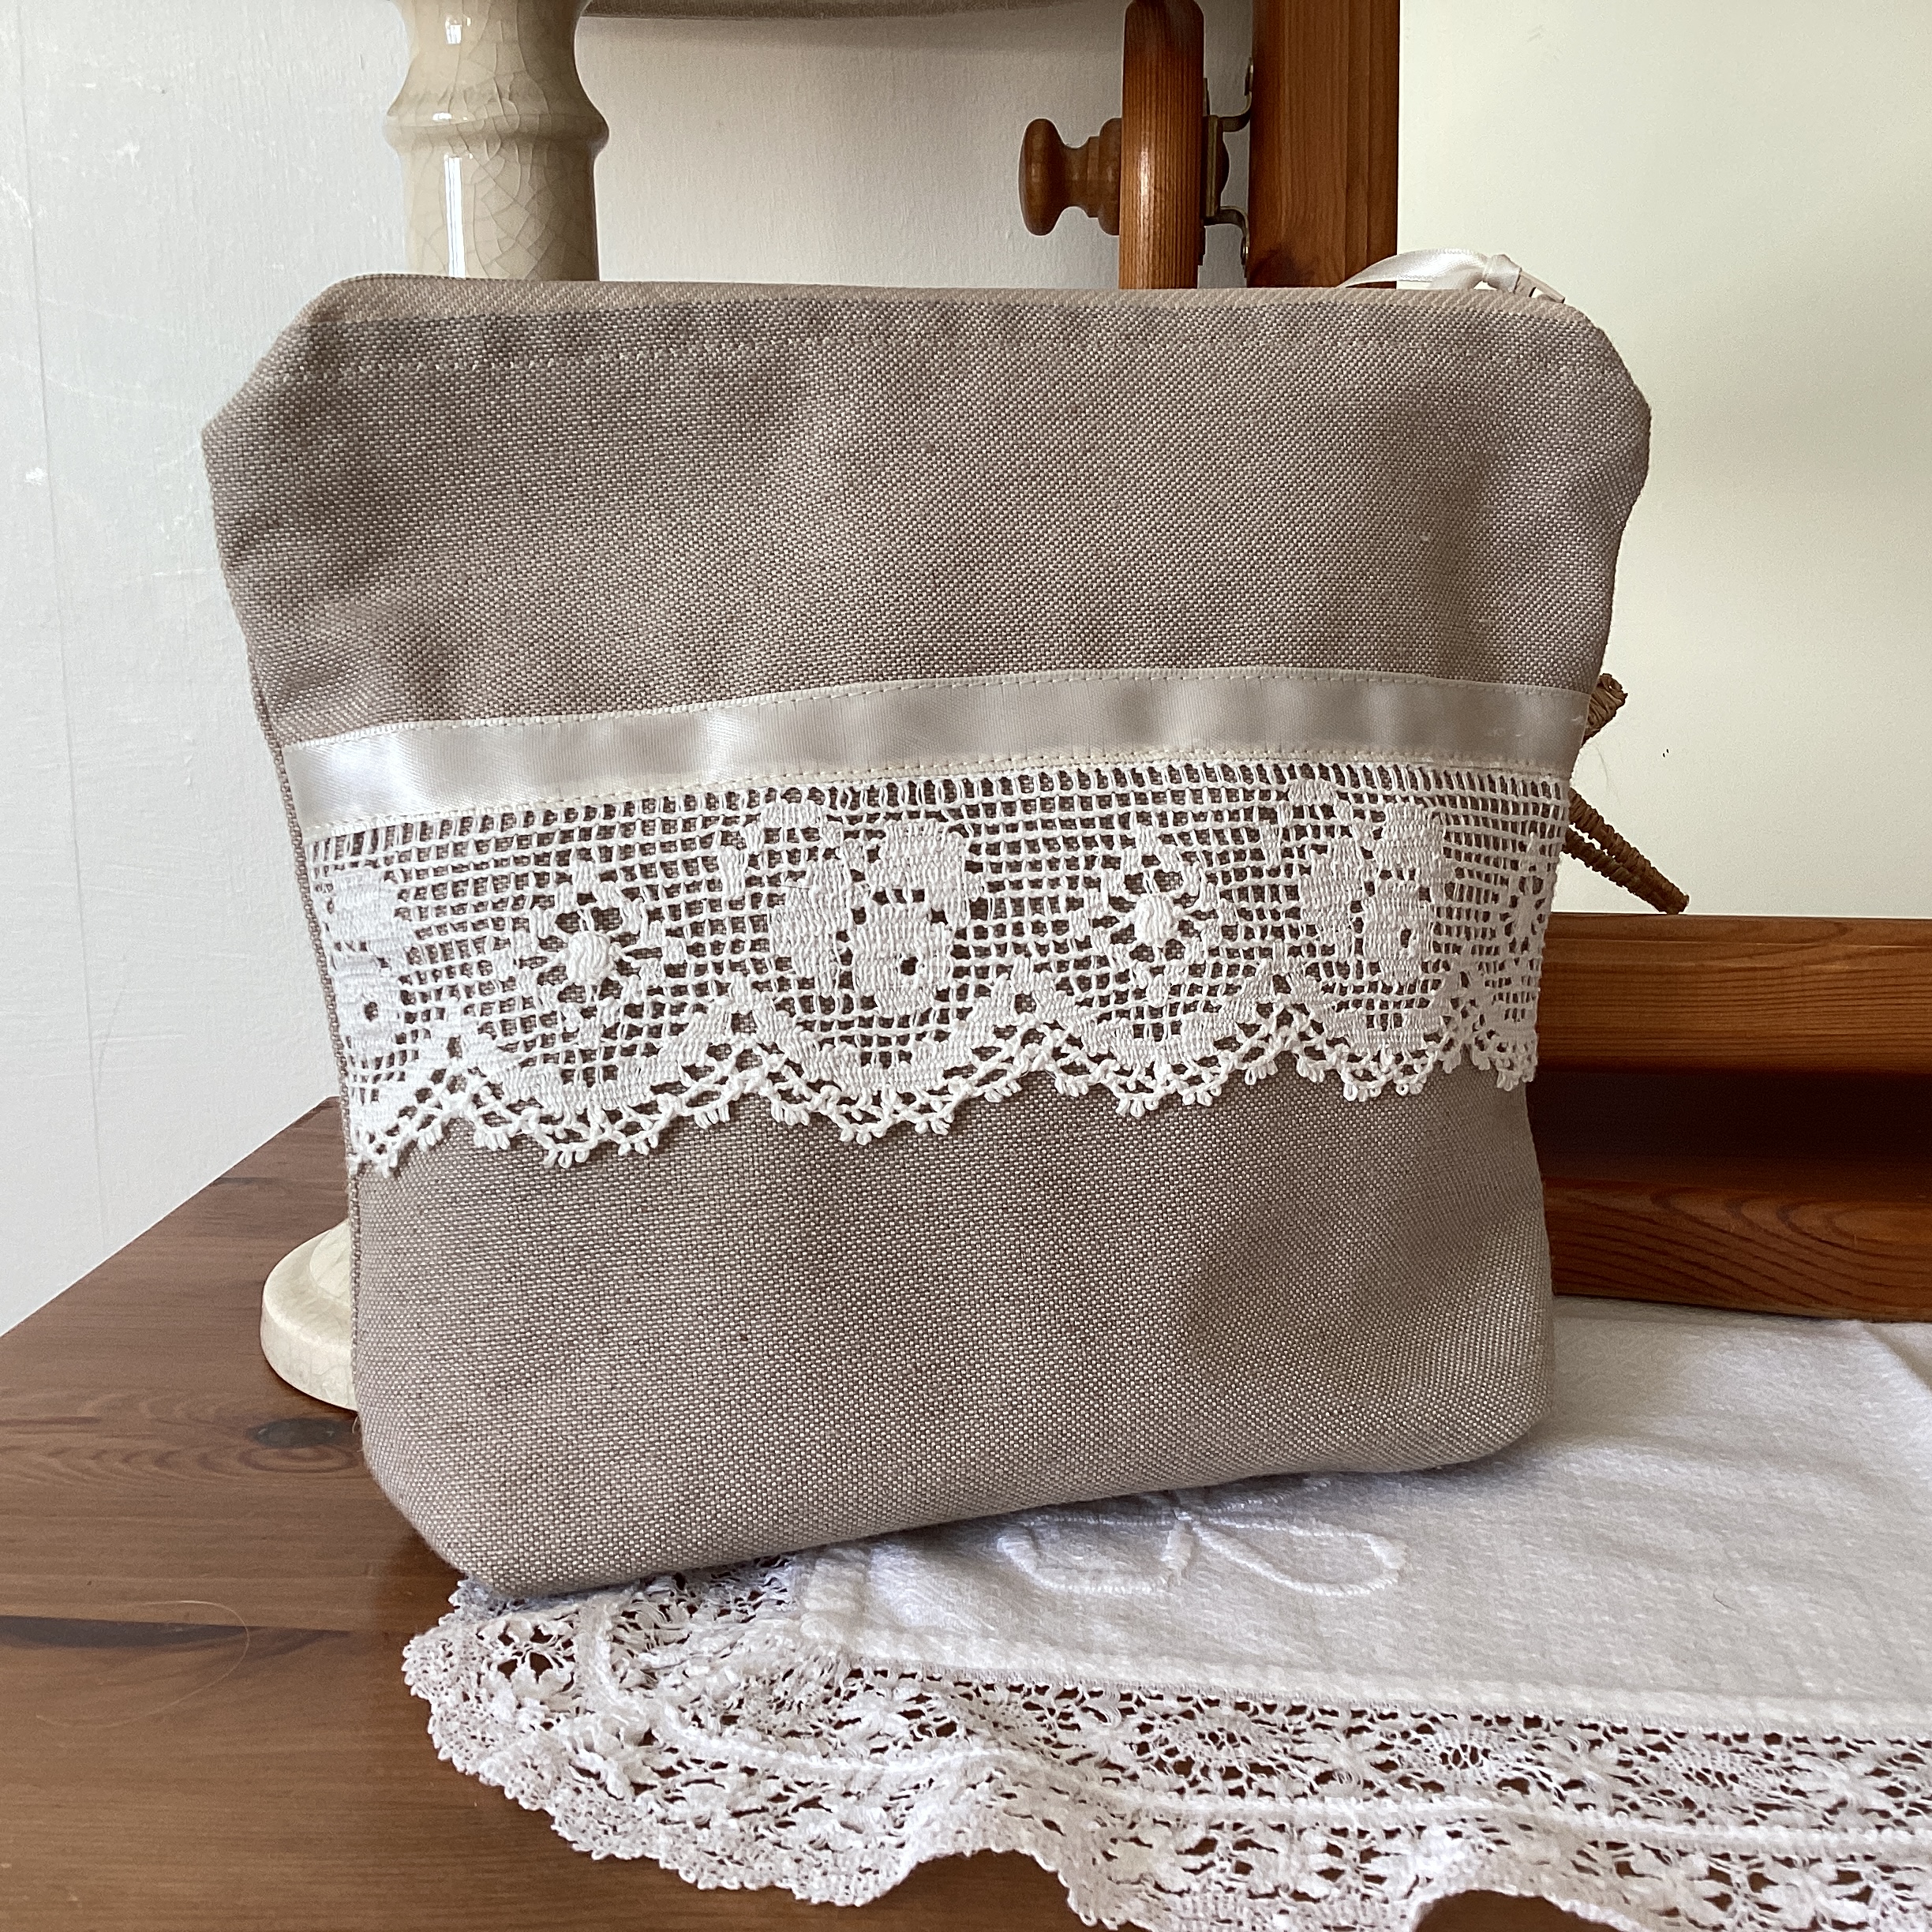 Zipped Pouch - beige and lace